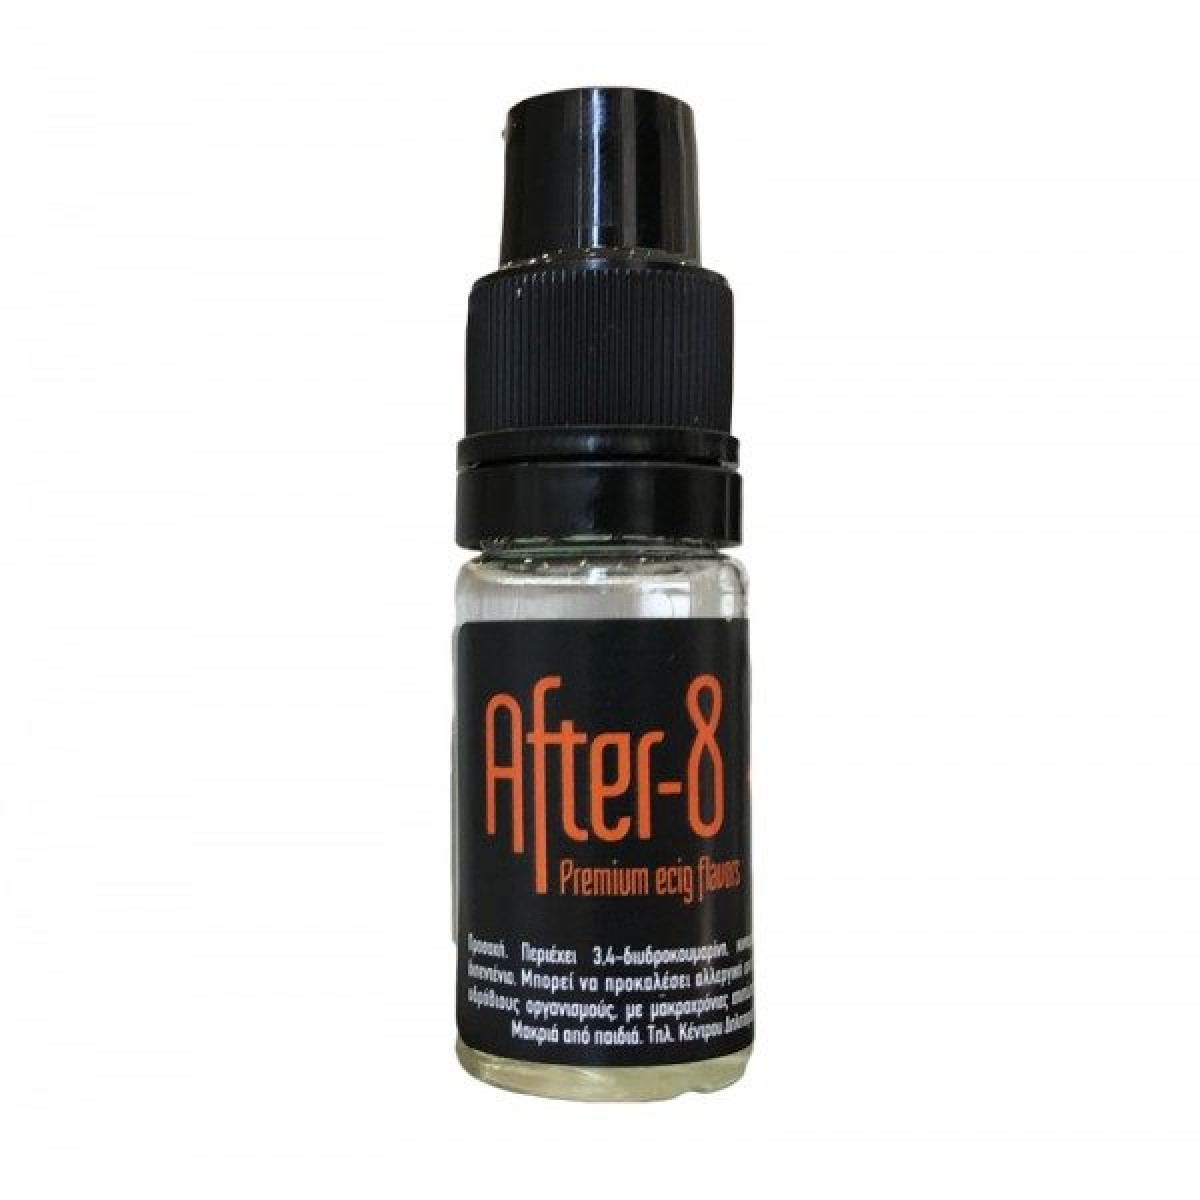 After-8 Red Ice Flavor 10ml